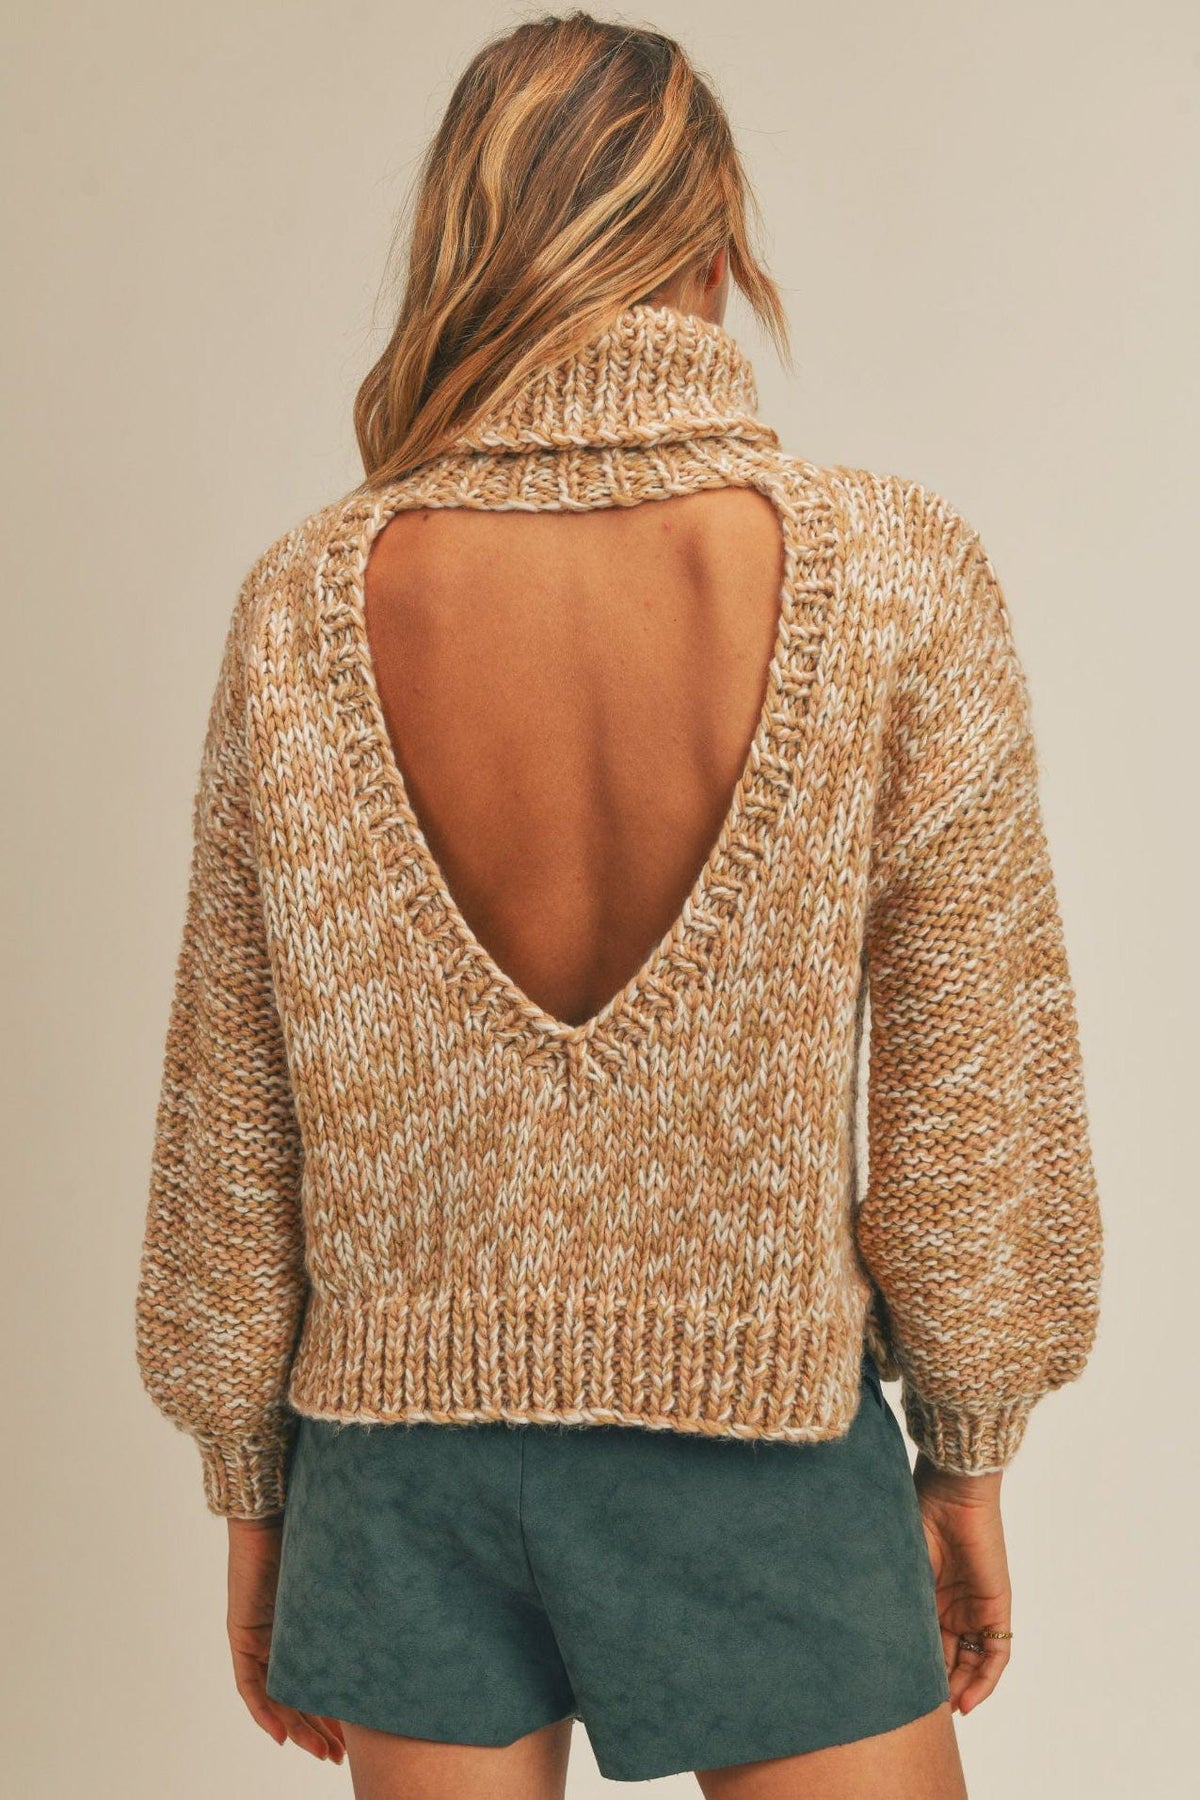 Sage The Label Hey Now Cut Out 2 Tone Chunky Knit Turtleneck Sweater - Shirts &amp; Tops - Blooming Daily